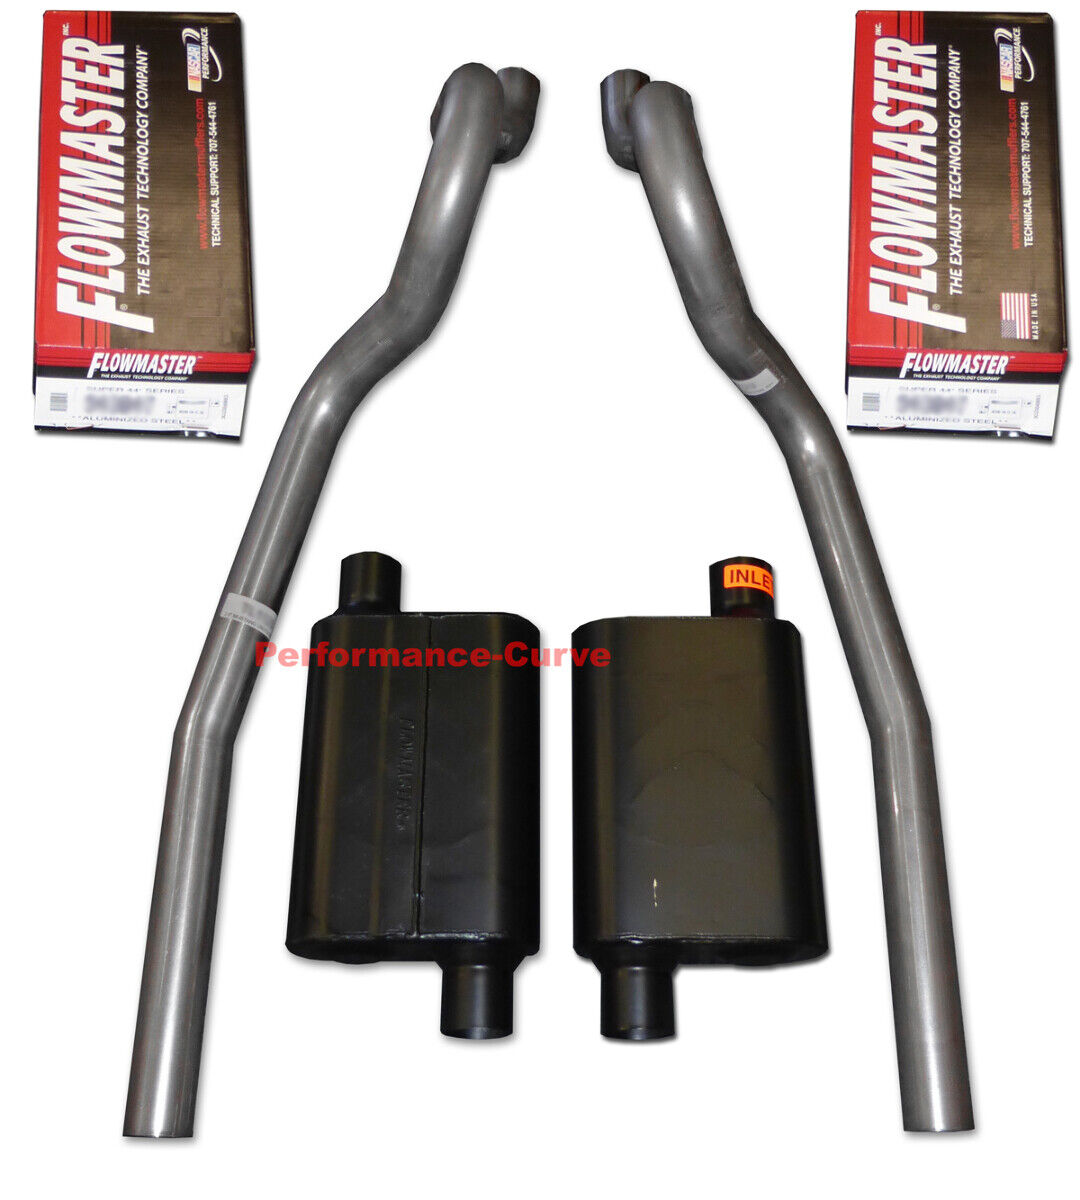 86-04 Ford Mustang GT 4.6 5.0 Exhaust System w/ Flowmaster Original 40 Mufflers